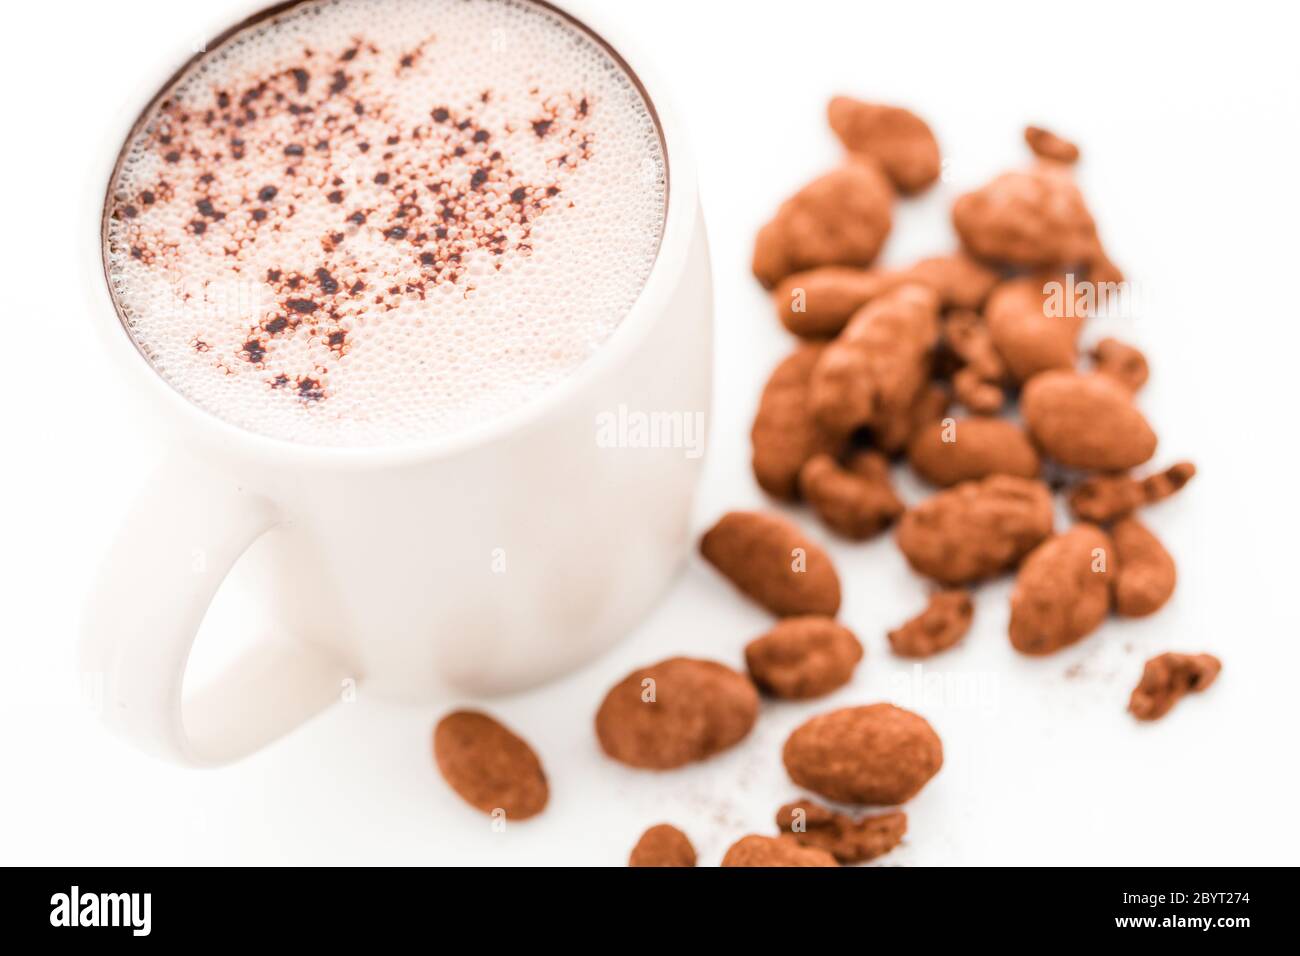 Sipping Chocolate Stock Photo